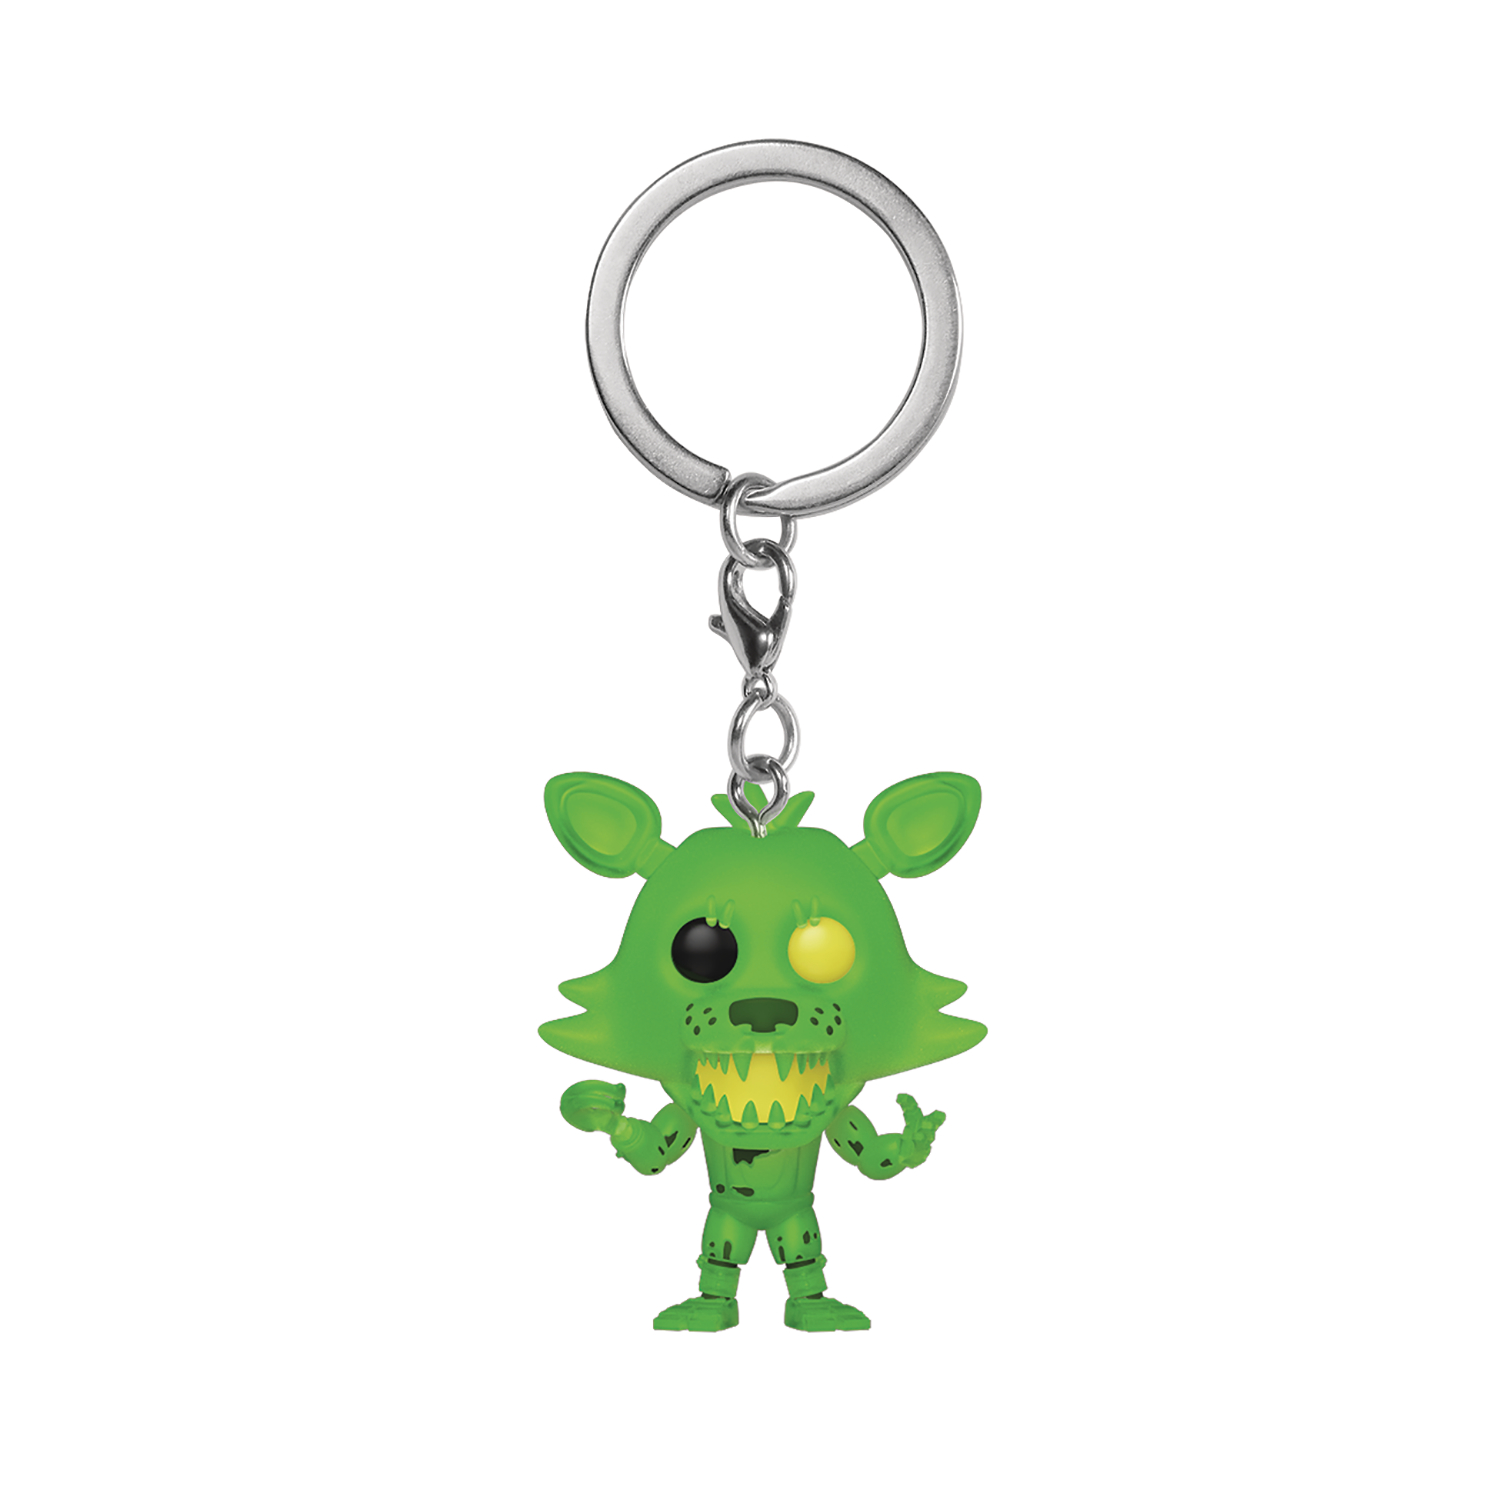 Five Nights at Freddy's- New Figures, Keychains, and Pop Coming